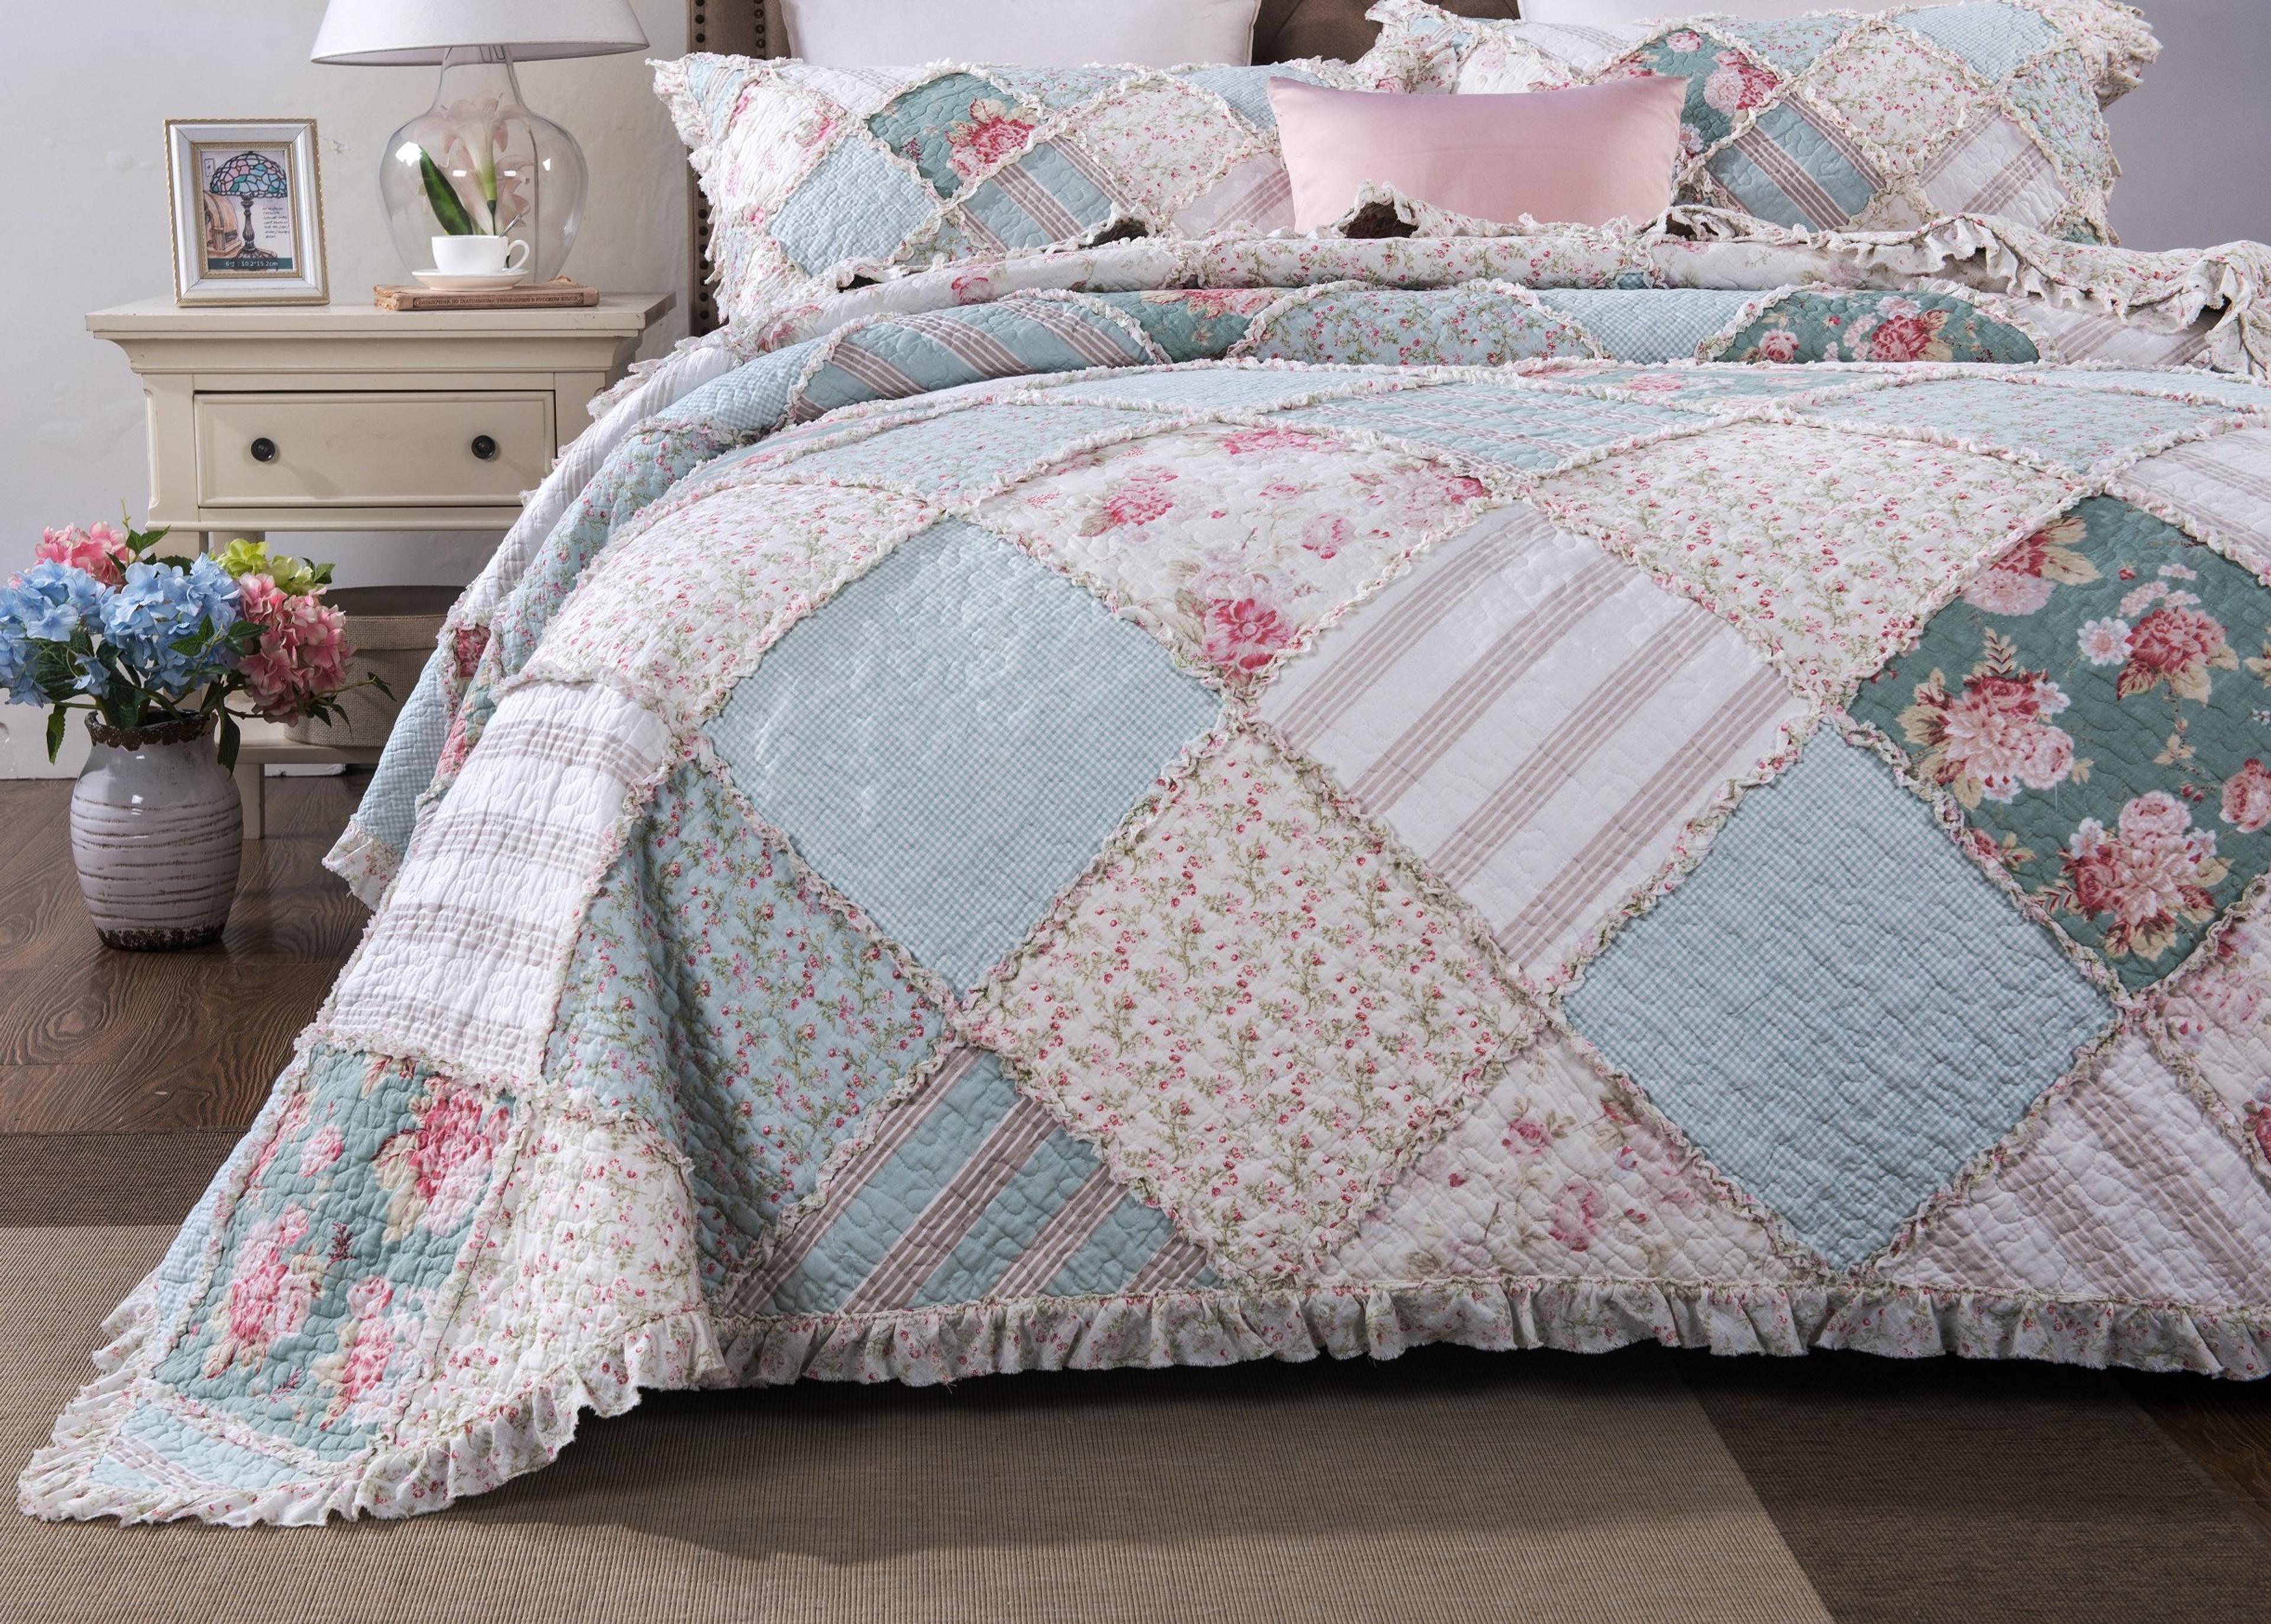 DaDa Bedding Cottage Patchwork Cotton Floral Bedspread Quilt Set - Hint of Mint Dainty Quilted Blooming Garden Botanical - Multi Colorful Ruffle Pastel Light Pink Blue/Green - Queen - 3-Pieces